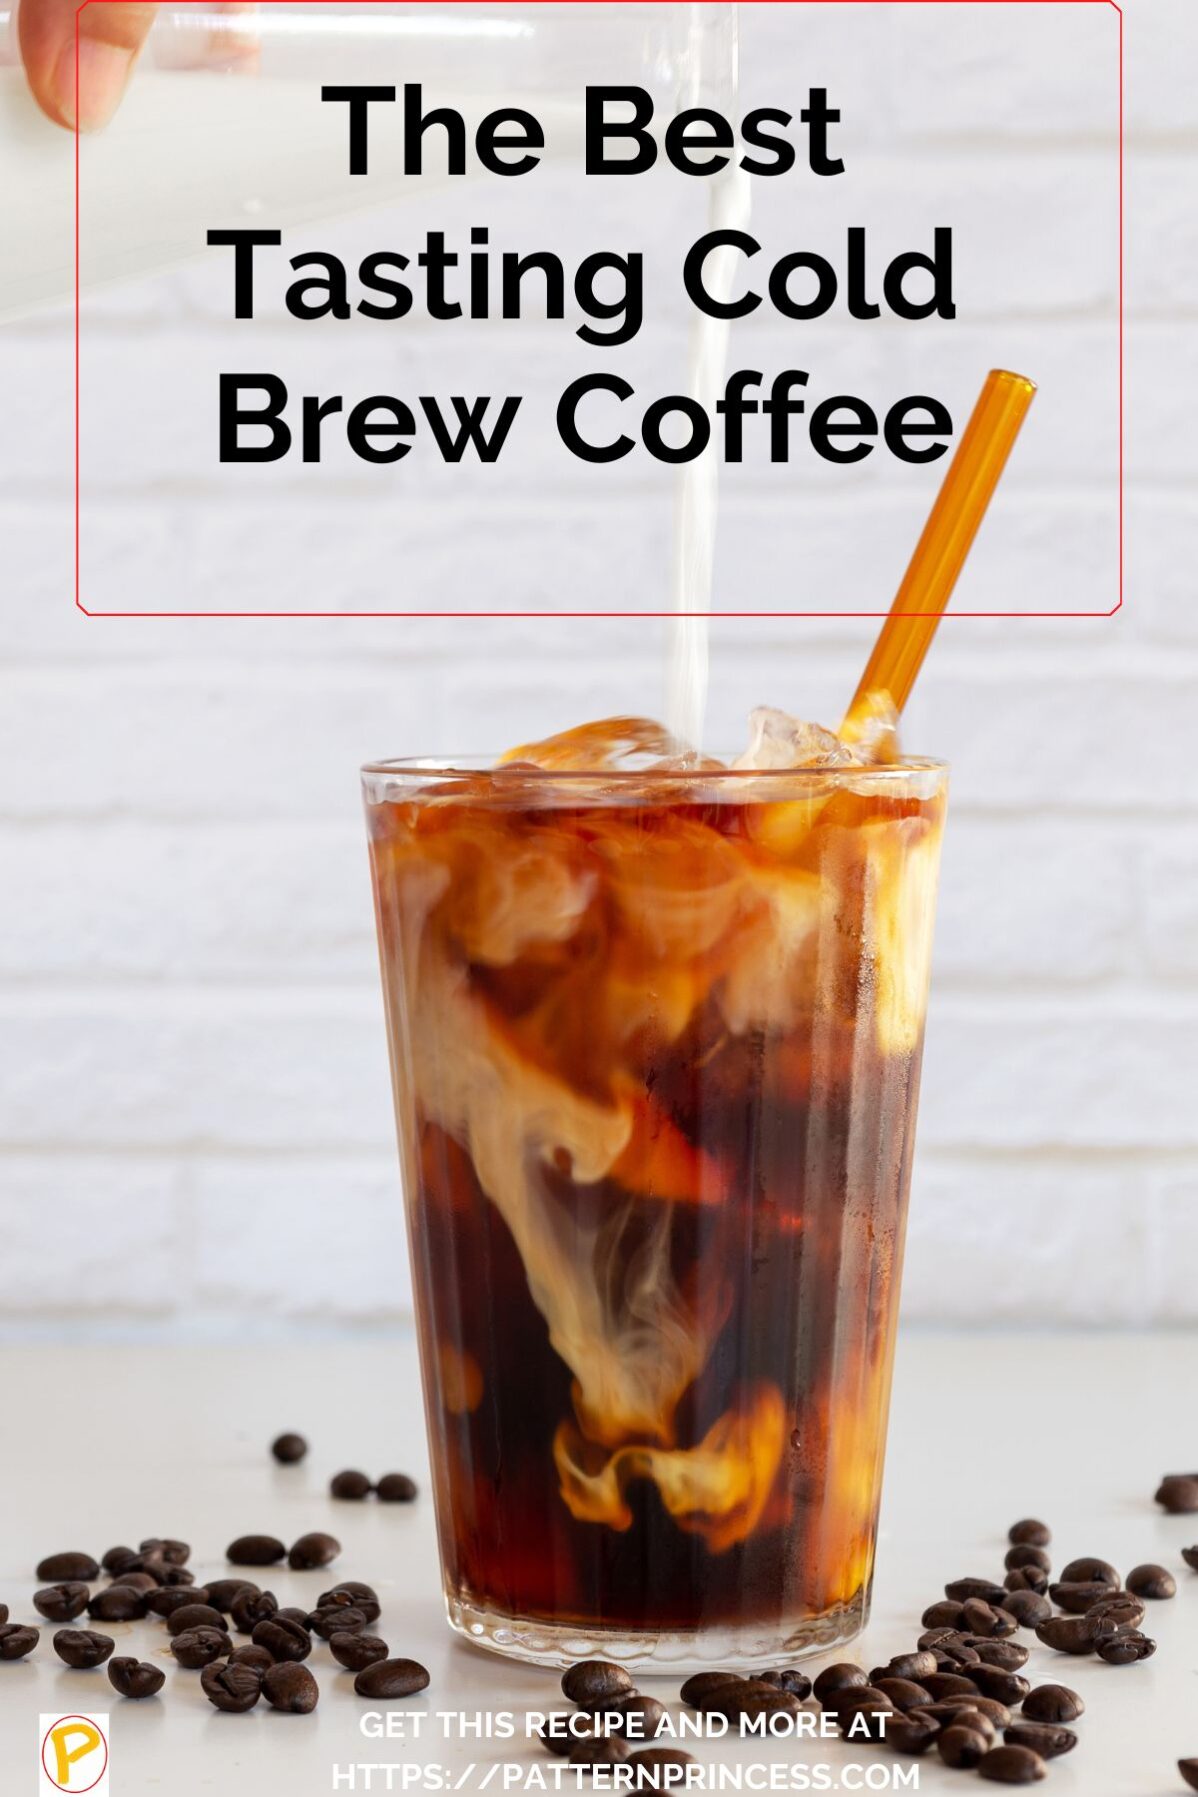 The Best Tasting Cold Brew Coffee